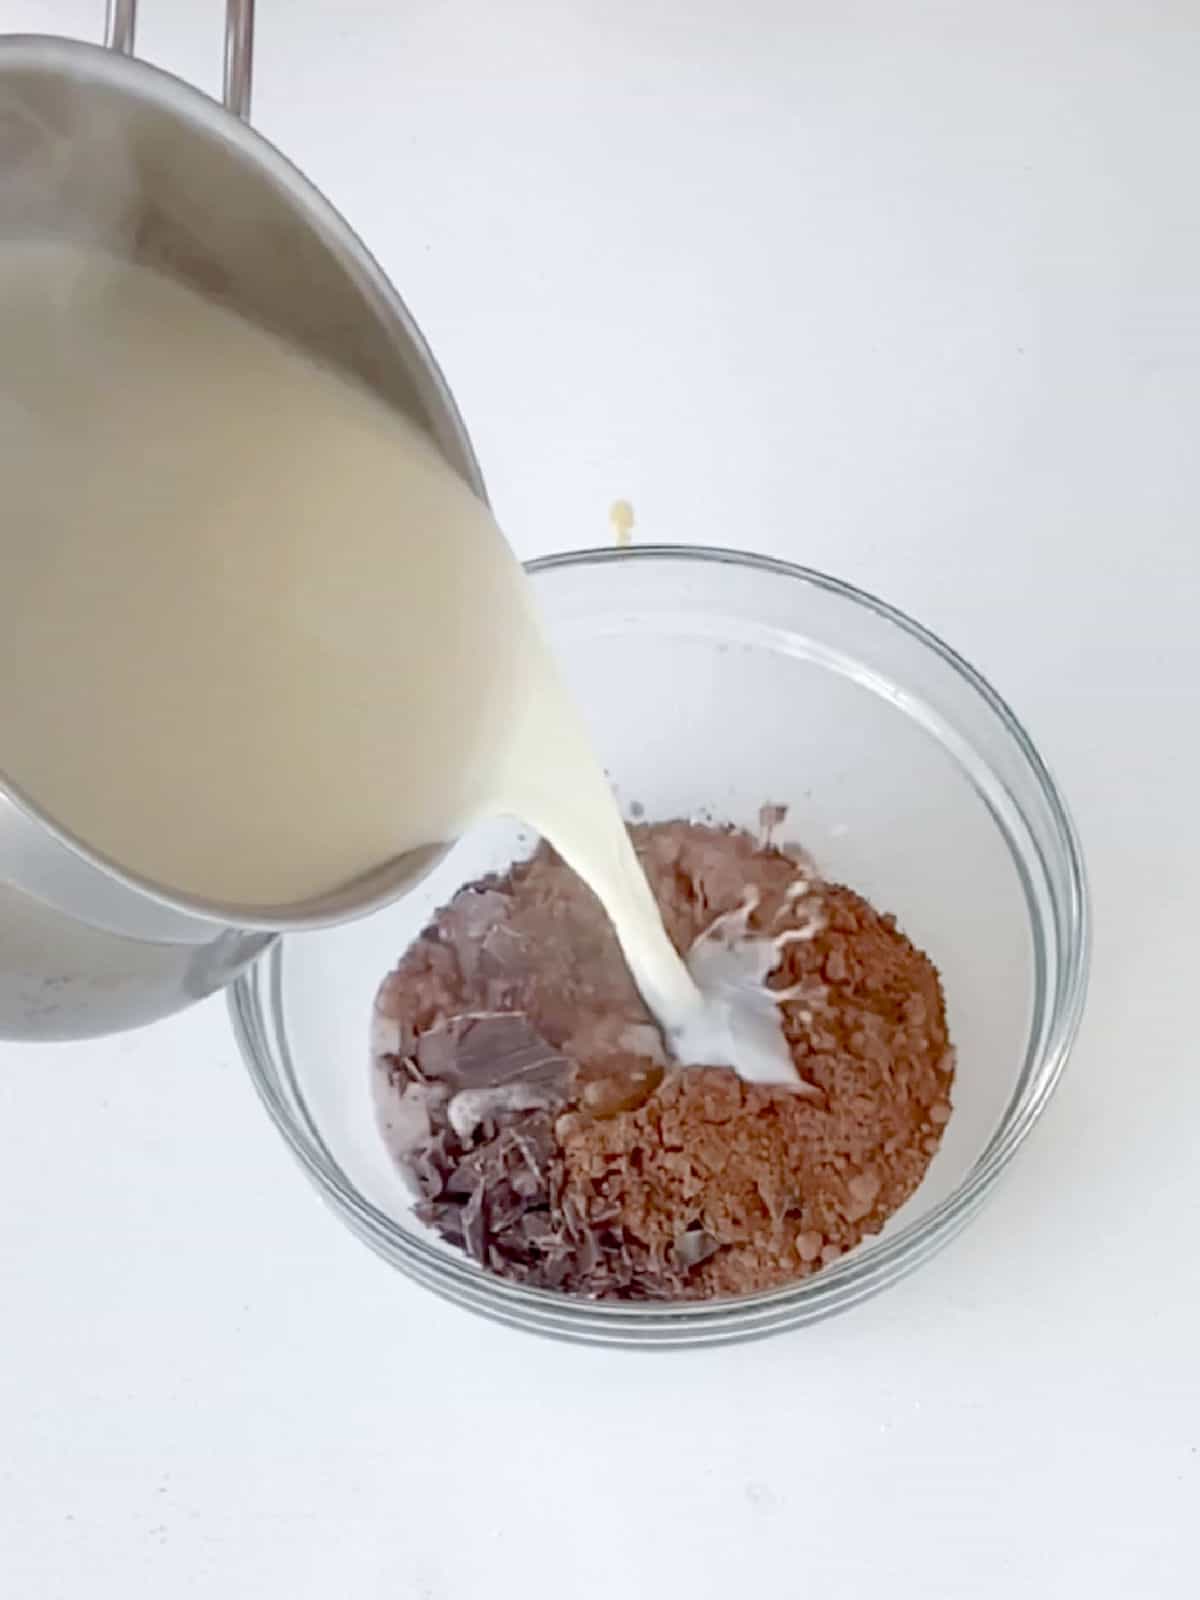 Milk being added to chopped chocolate and cocoa powder in a glass bowl on a white surface. 